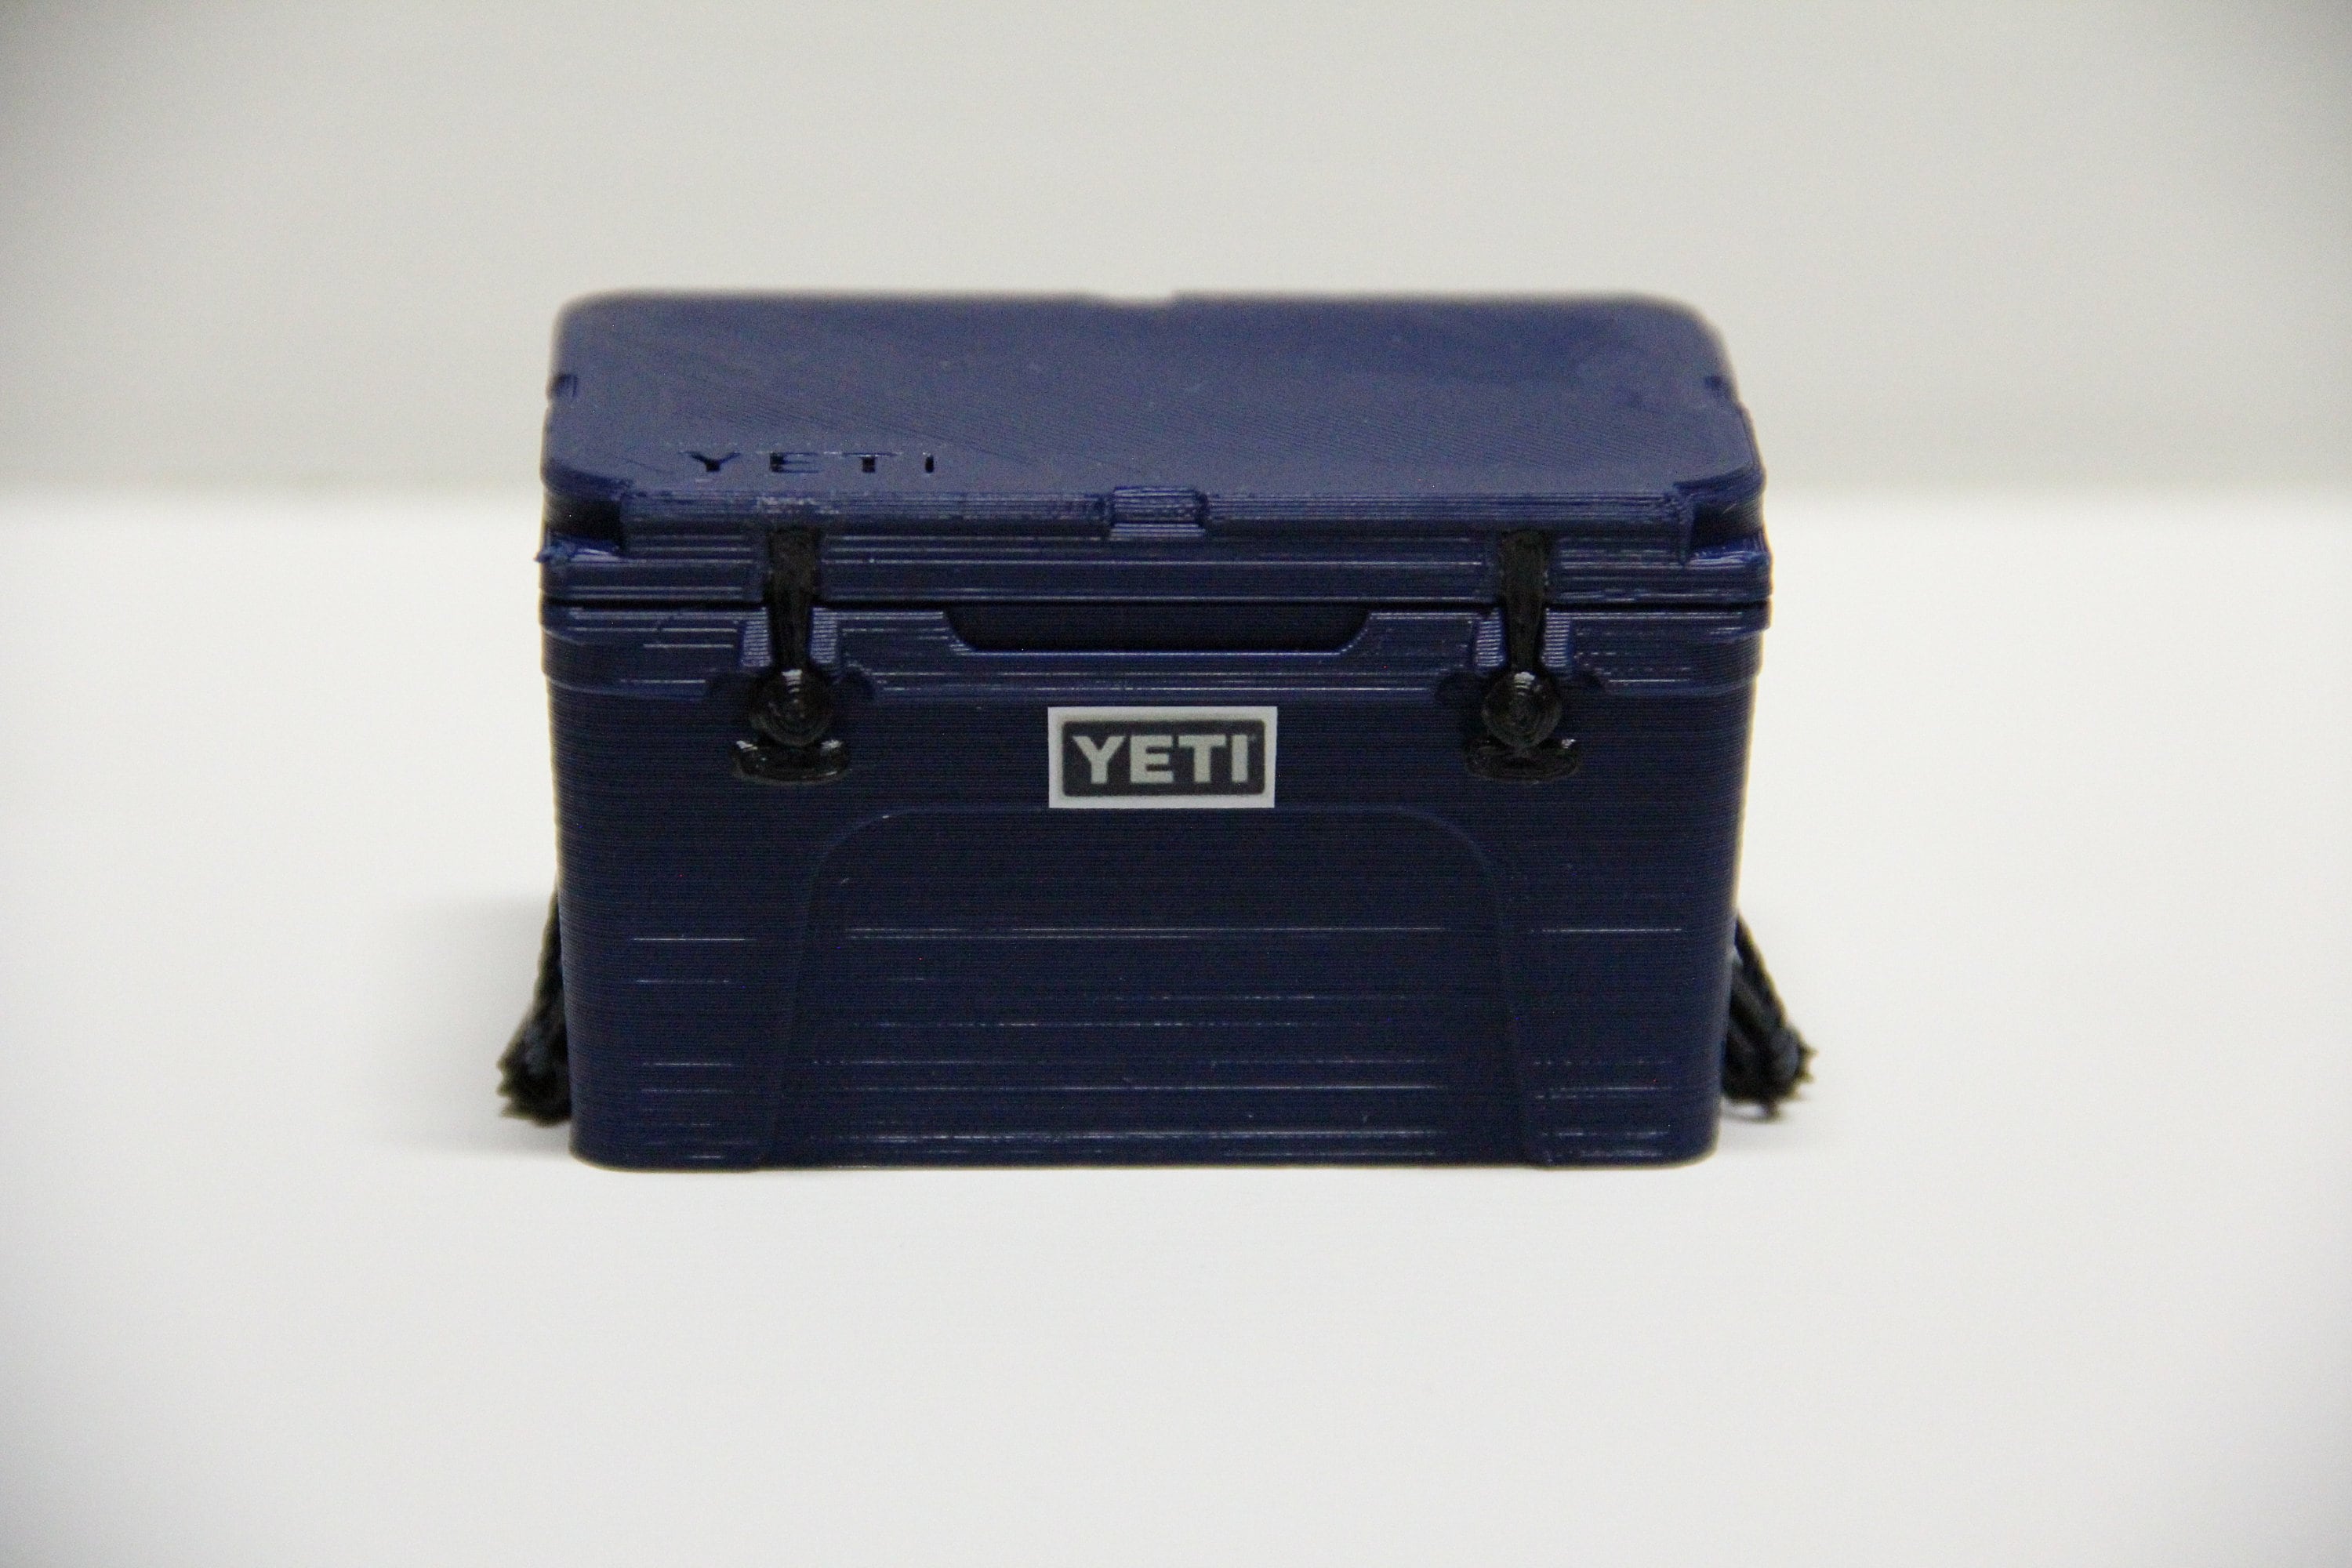 A Mini Yeti Cooler. What will come out next? #yeti #miniature #cooler